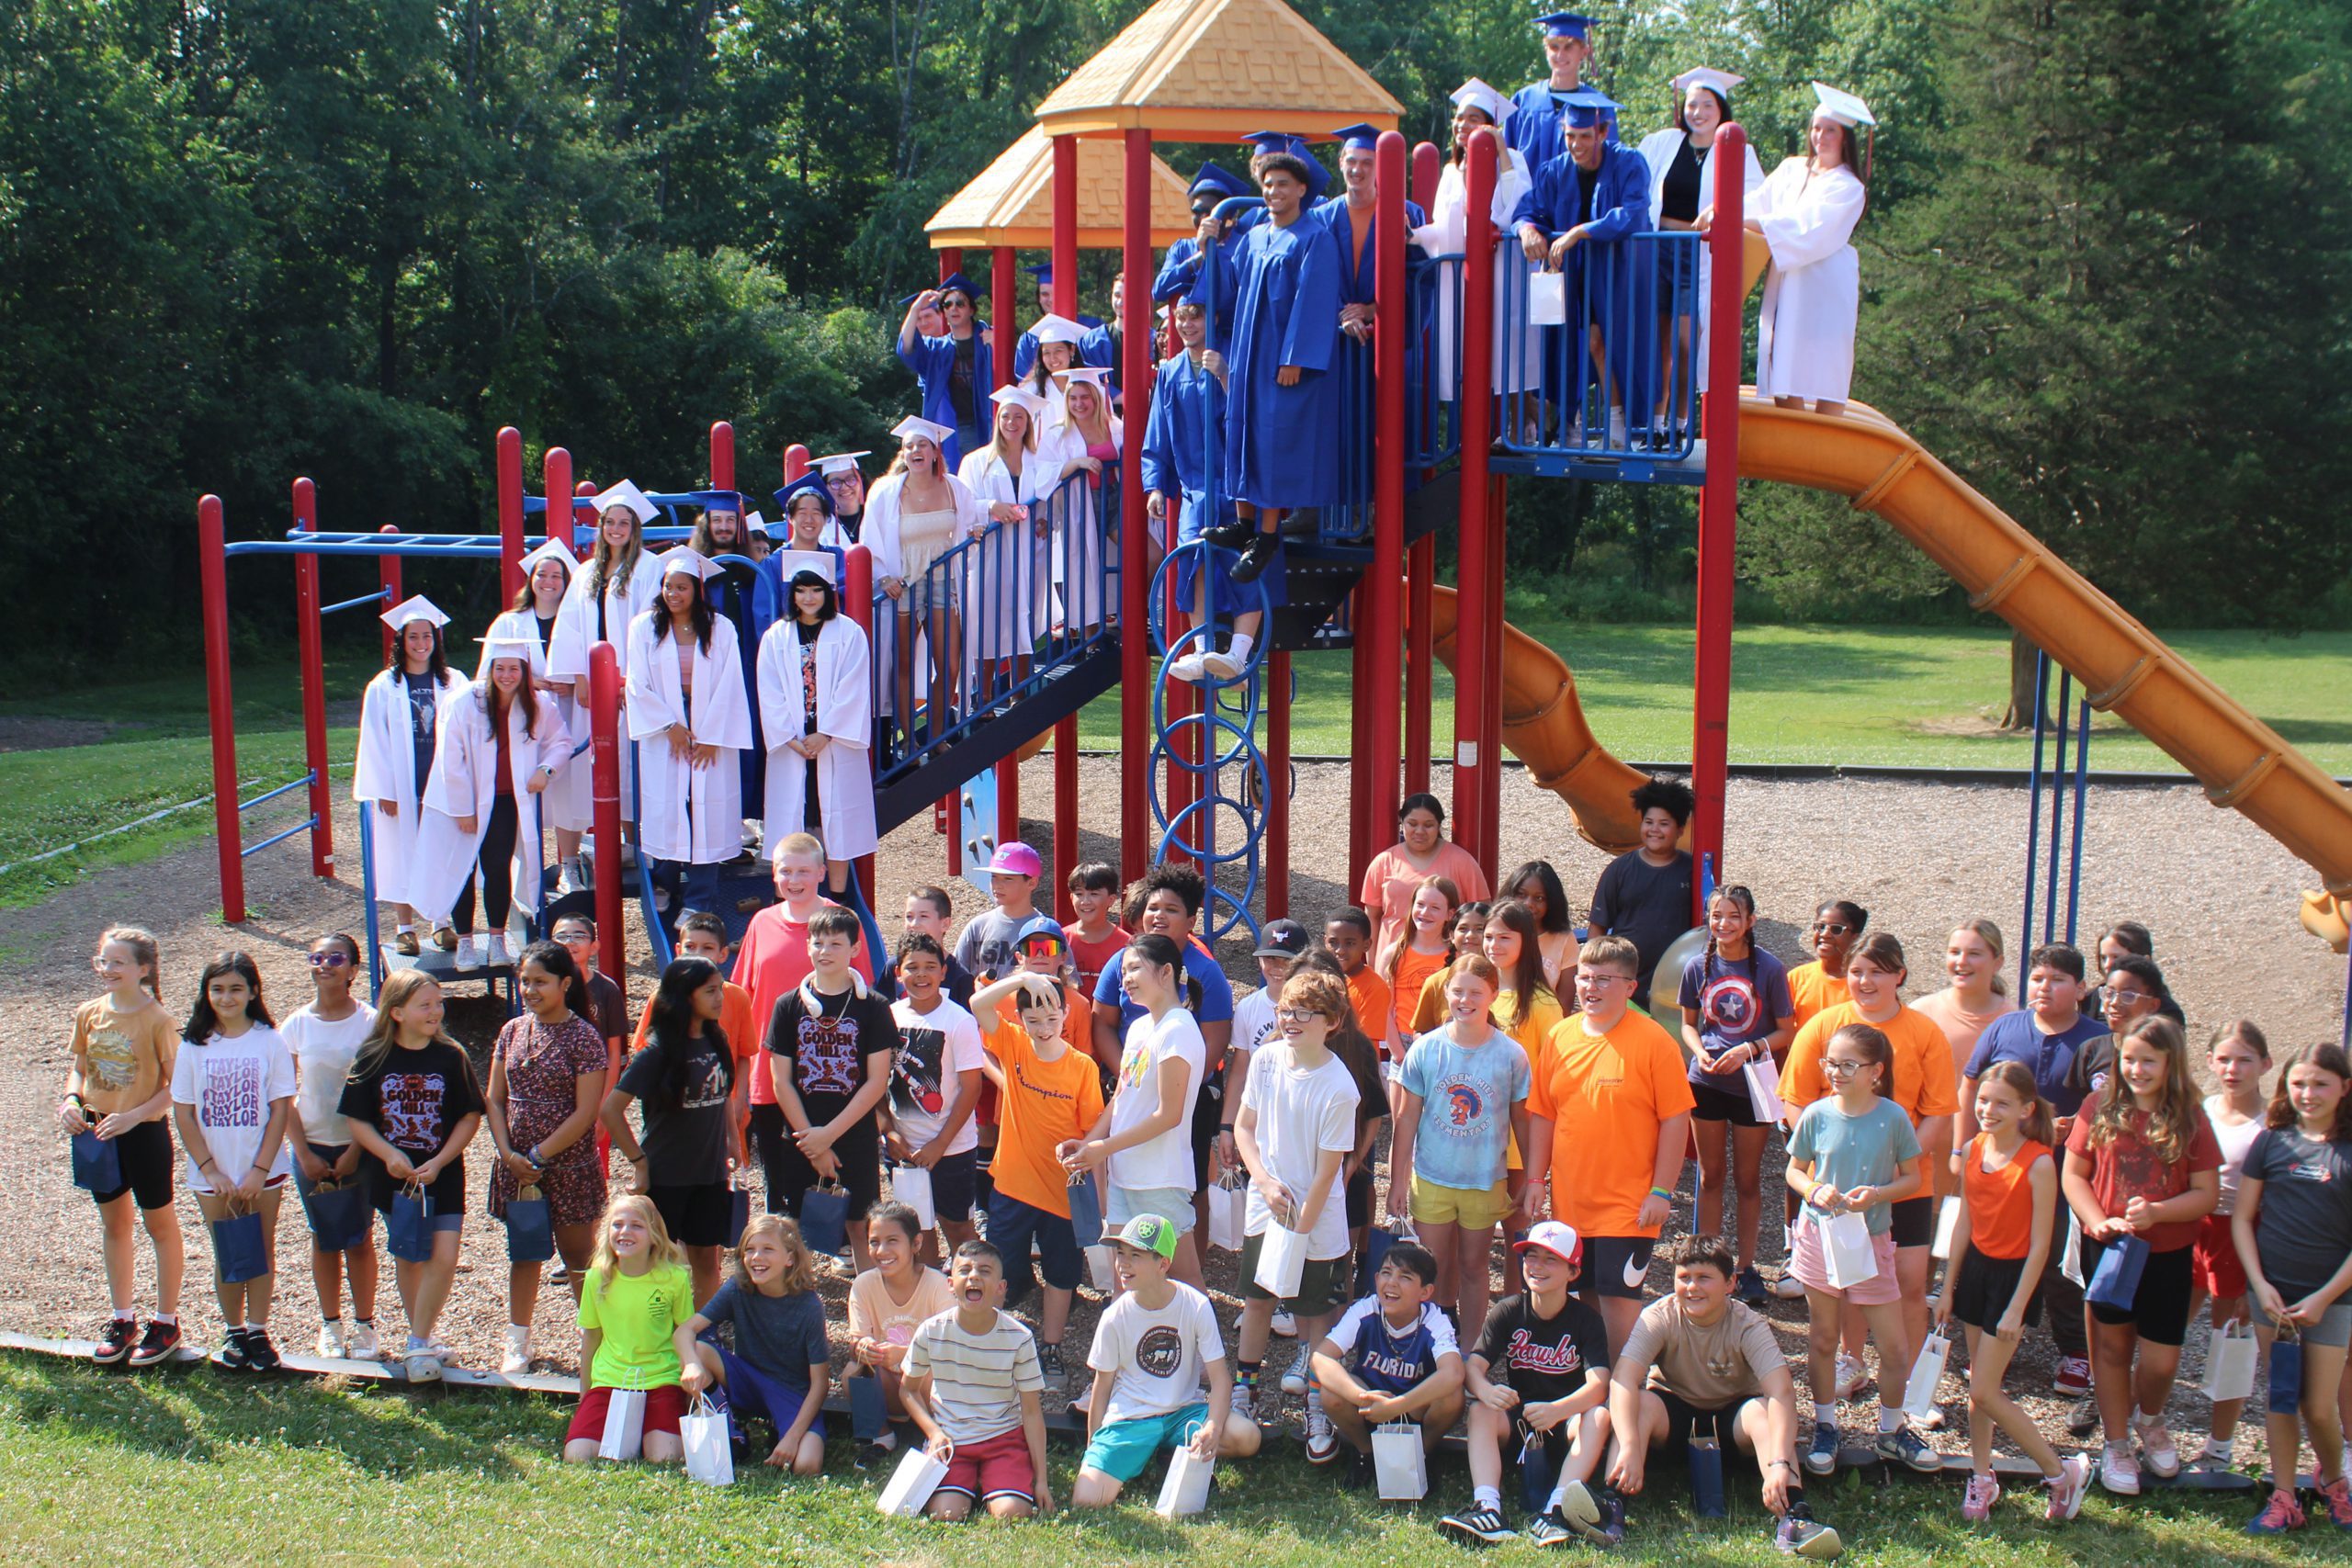 Seniors, in caps and gown, stand on the playground smiling with 5th graders down below